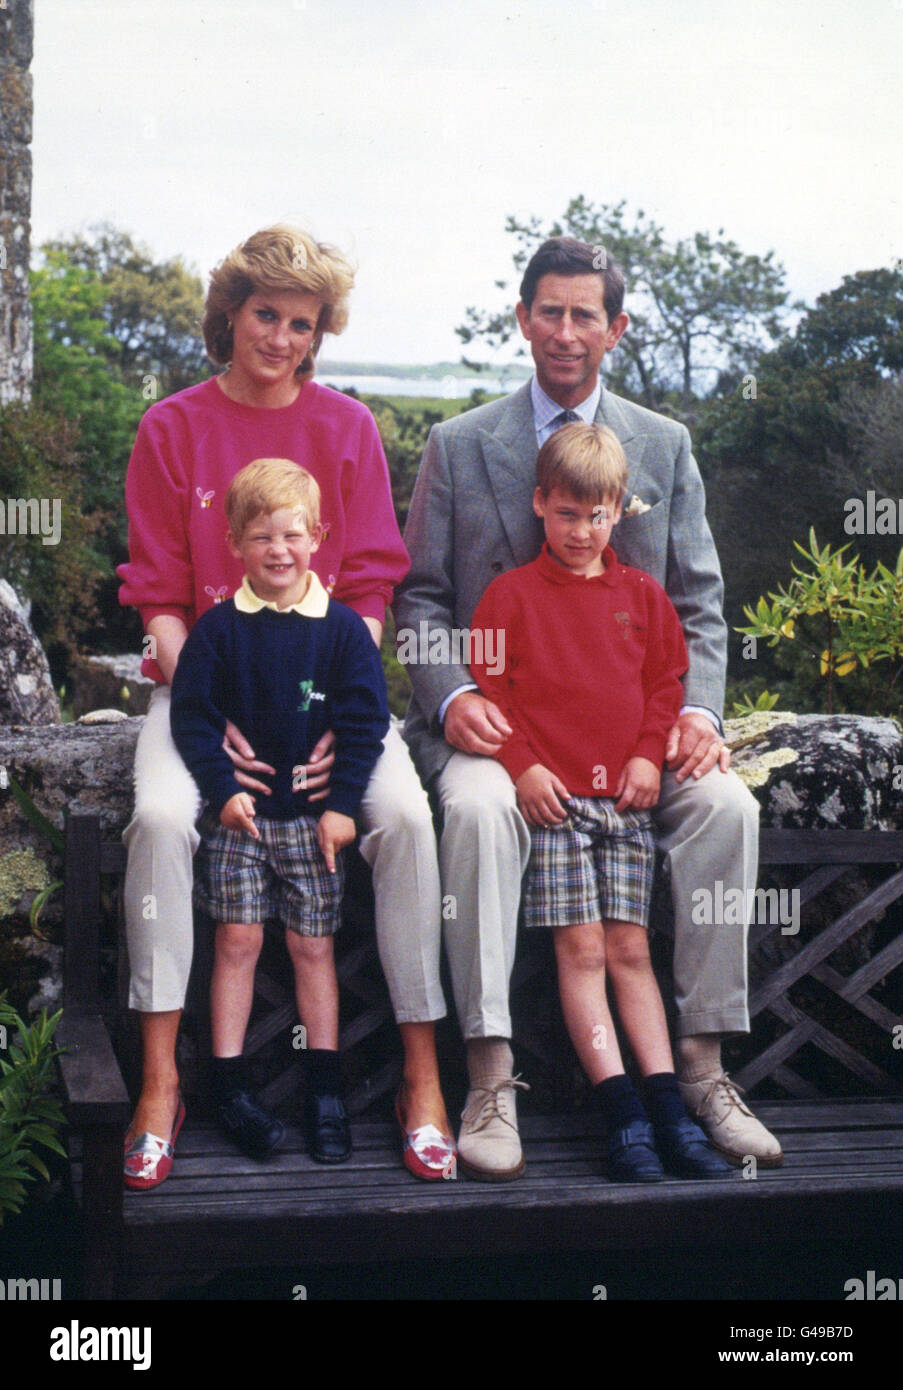 PA NEWS PHOTO : 7230-1 : 1/6/89 : THE PRINCE AND PRINCESS OF WALES WITH THEIR SONS PRINCES WILLIAM, 6, (RIGHT) AND HARRY, 4, ON HOLIDAY IN THE SCILLY ISLES, OFF LAND'S END, CORNWALL. PHOTO BY RON BELL. Stock Photo